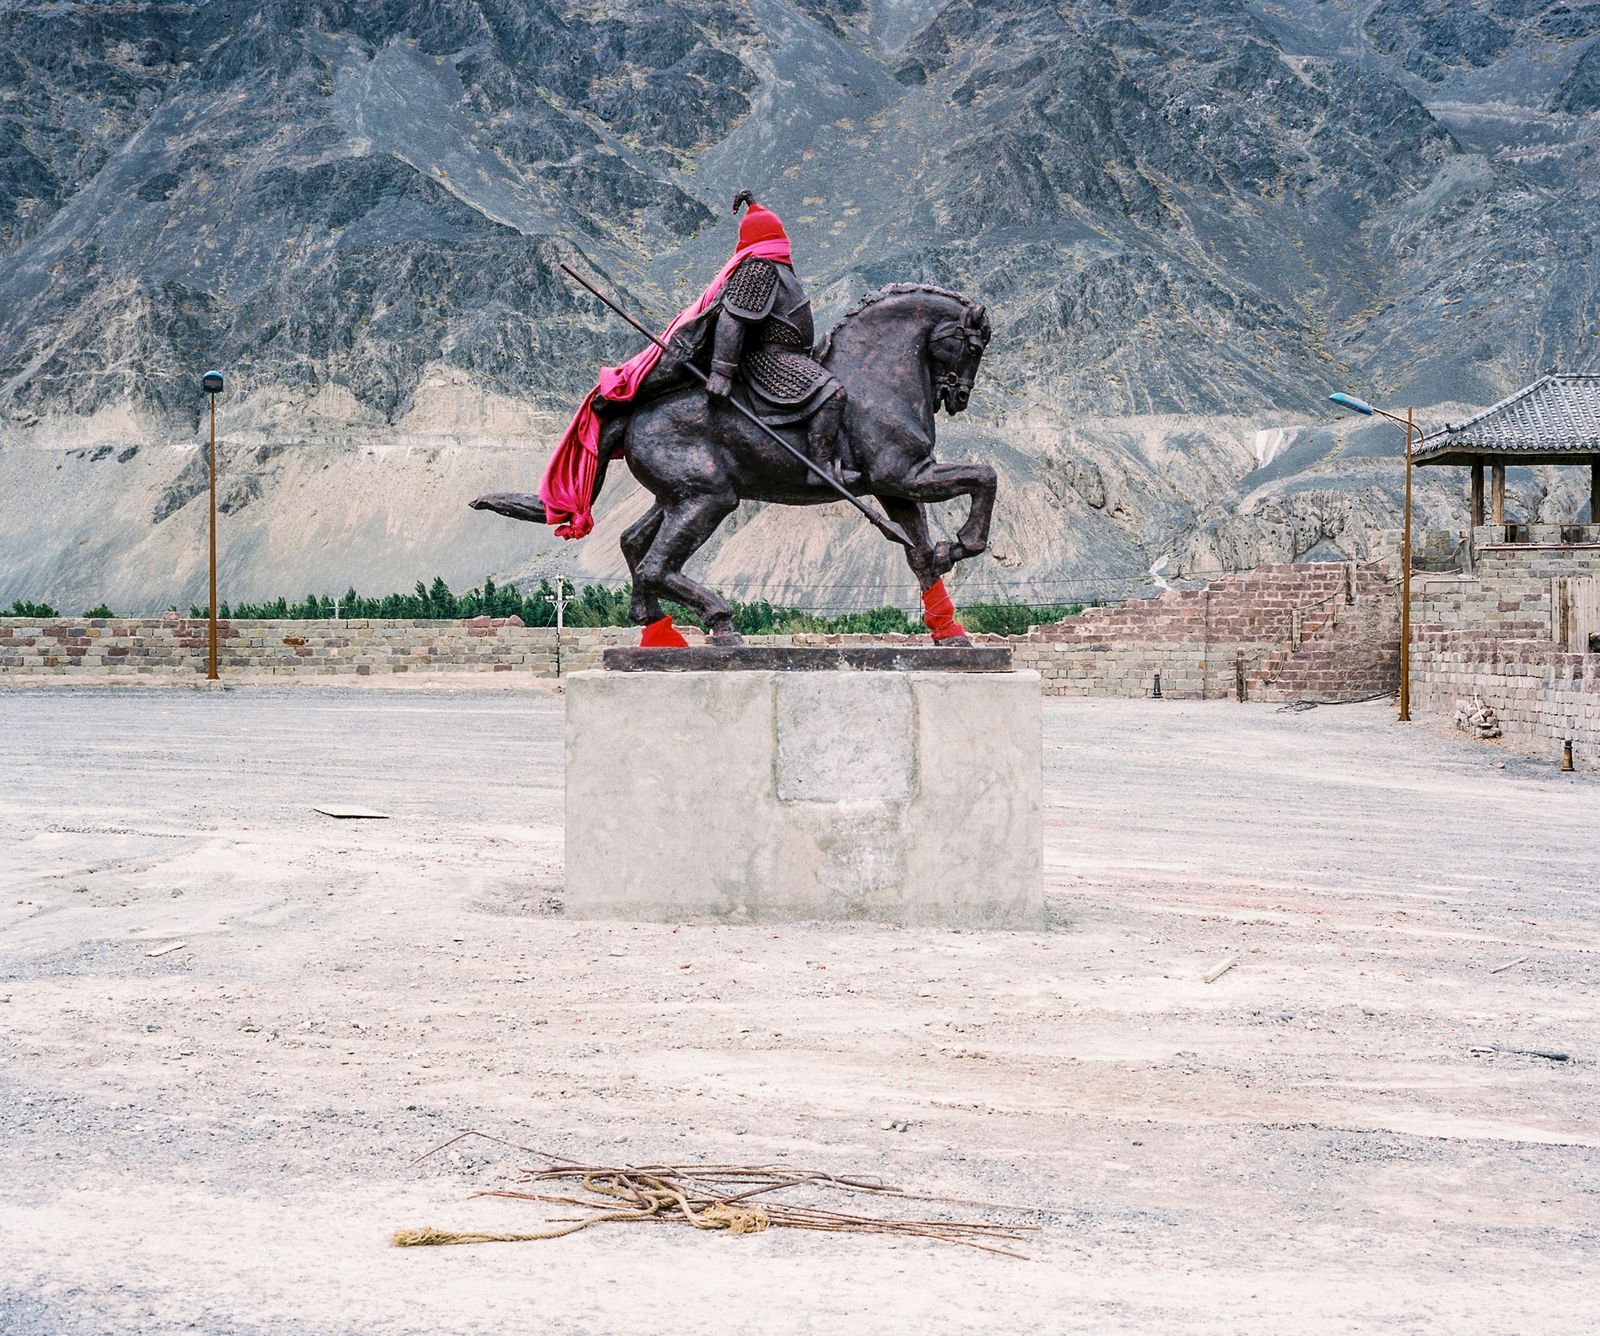 © Patrick Wack - June 2016. Xinjiang province, China. Blindfolded statue of a Kazakh warrior on the road from Turpan back to Urumqi.